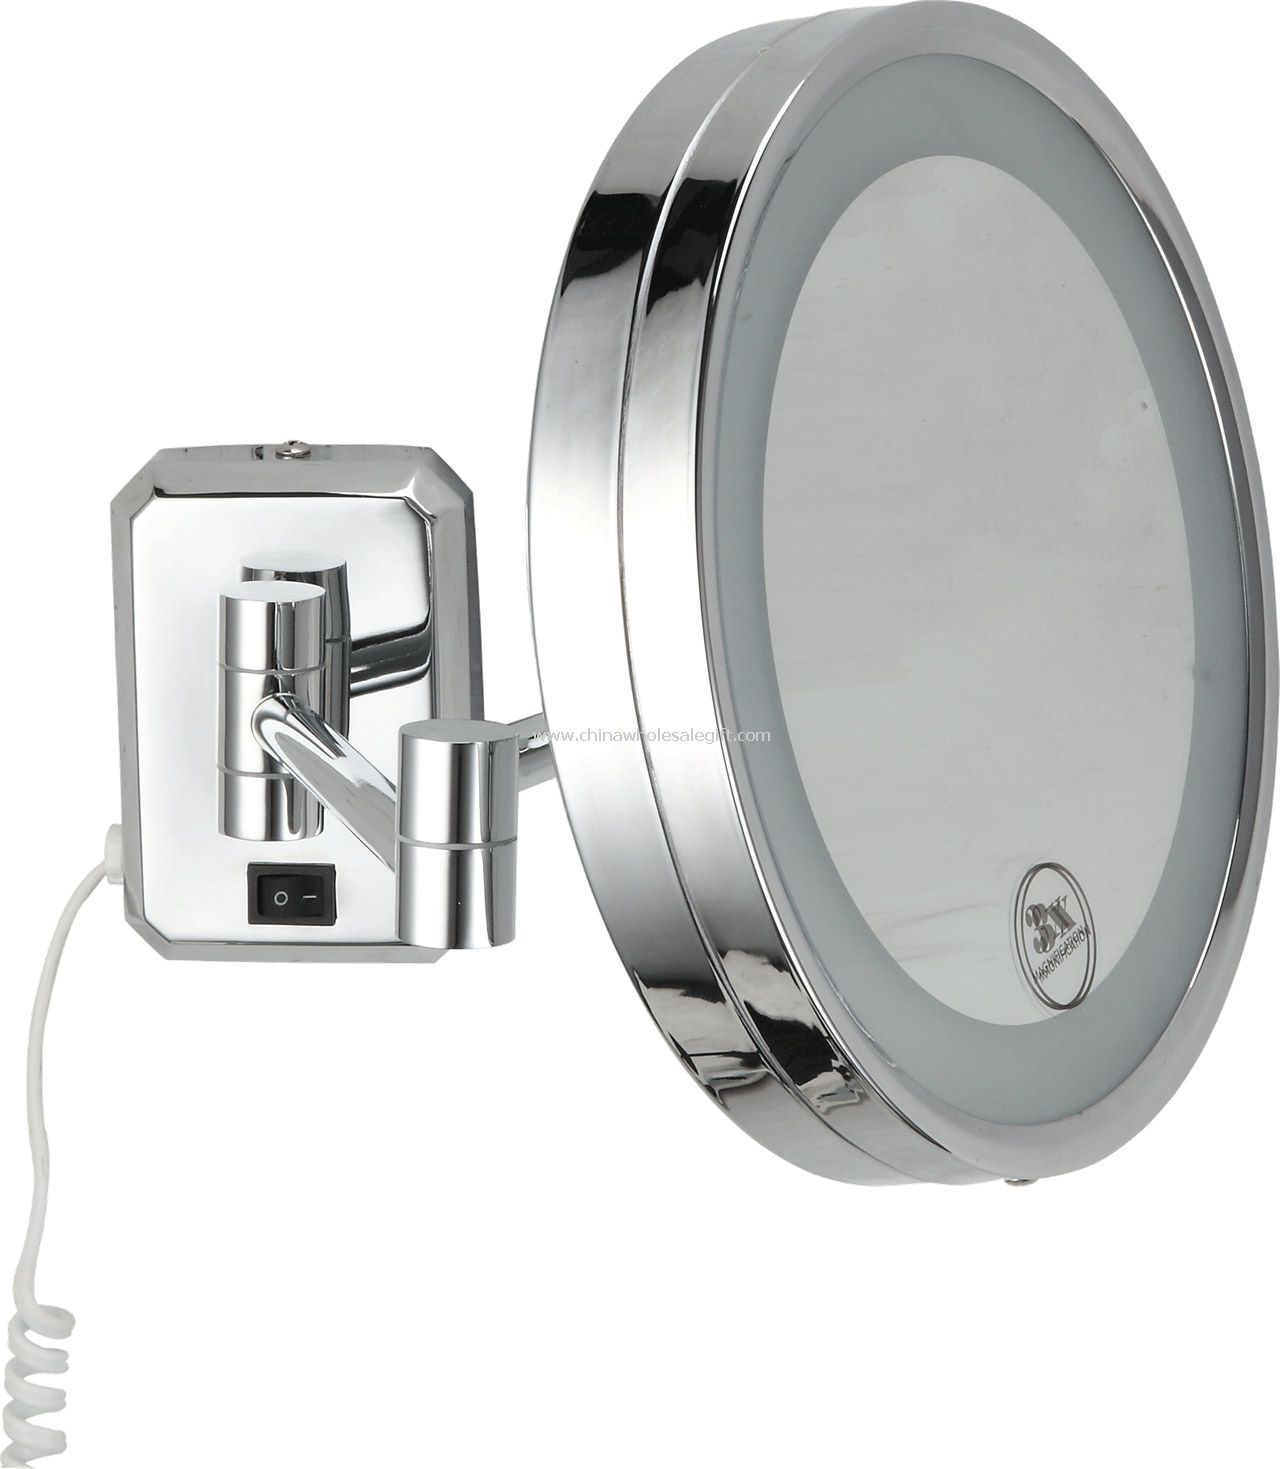 Wall mounted round mirror